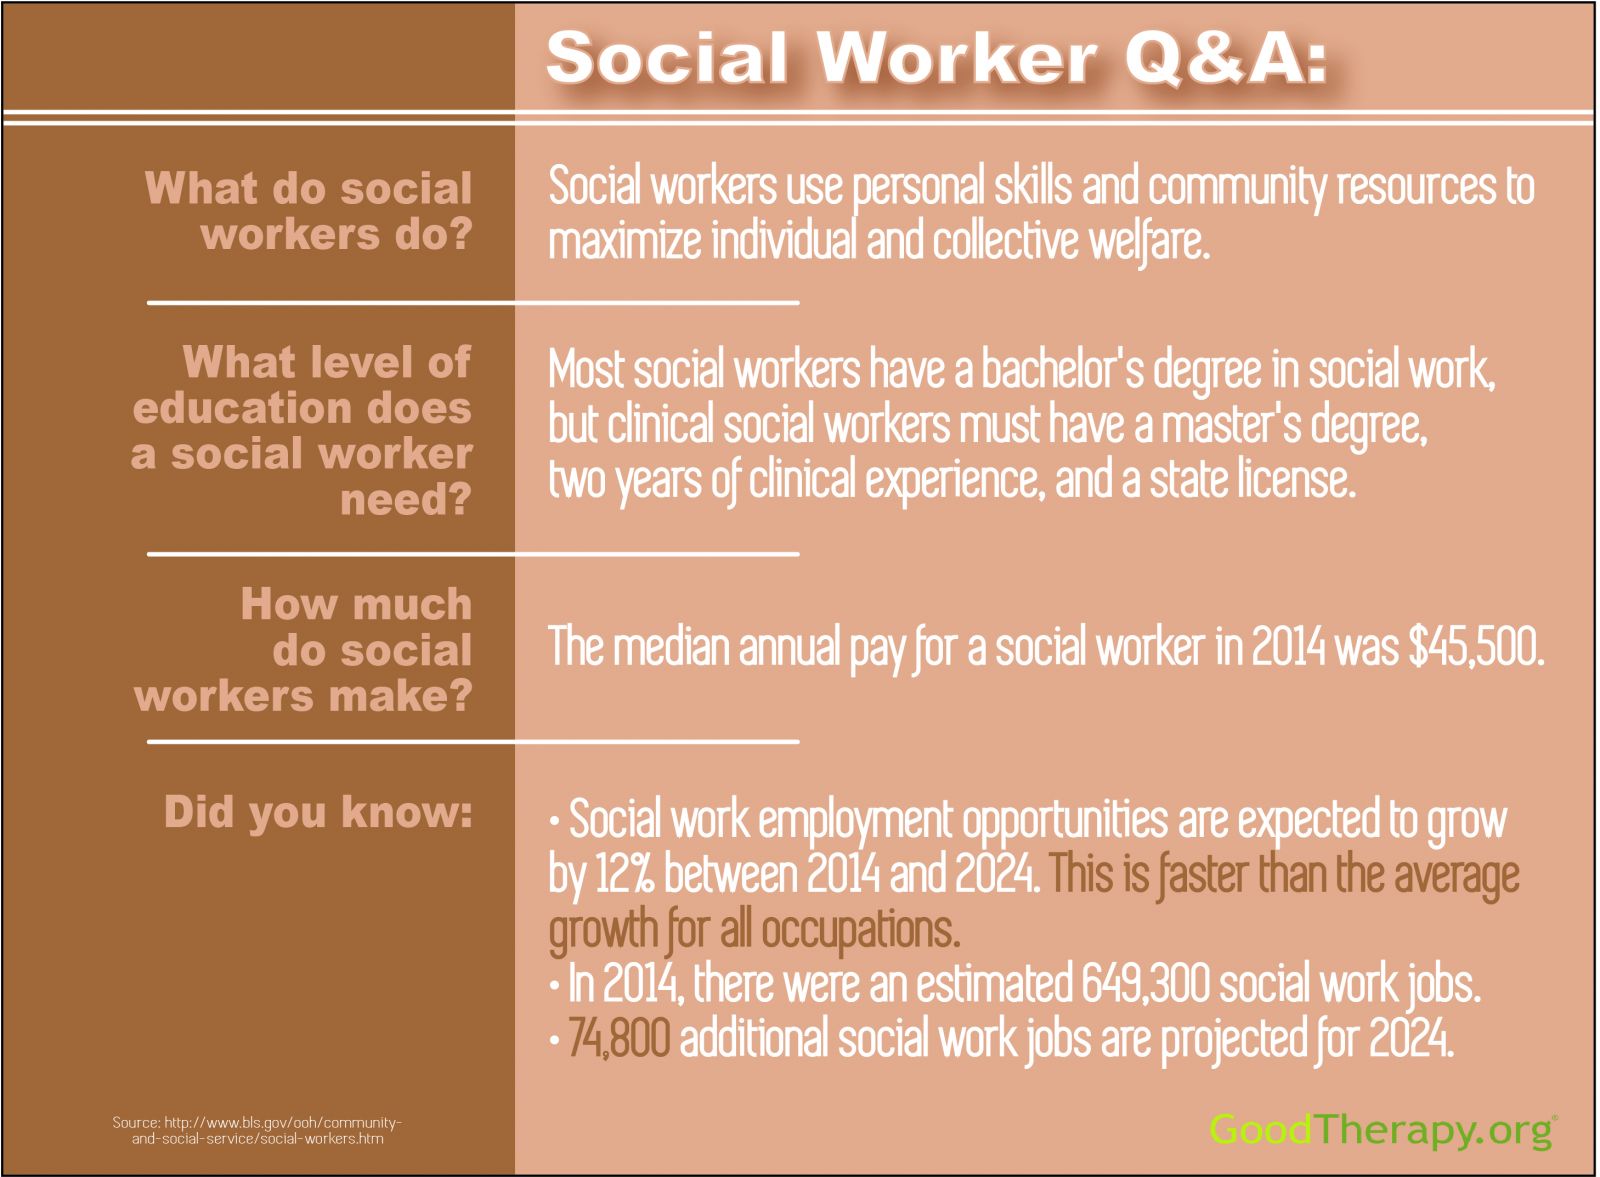 Social worker facts about education, pay, and more. 